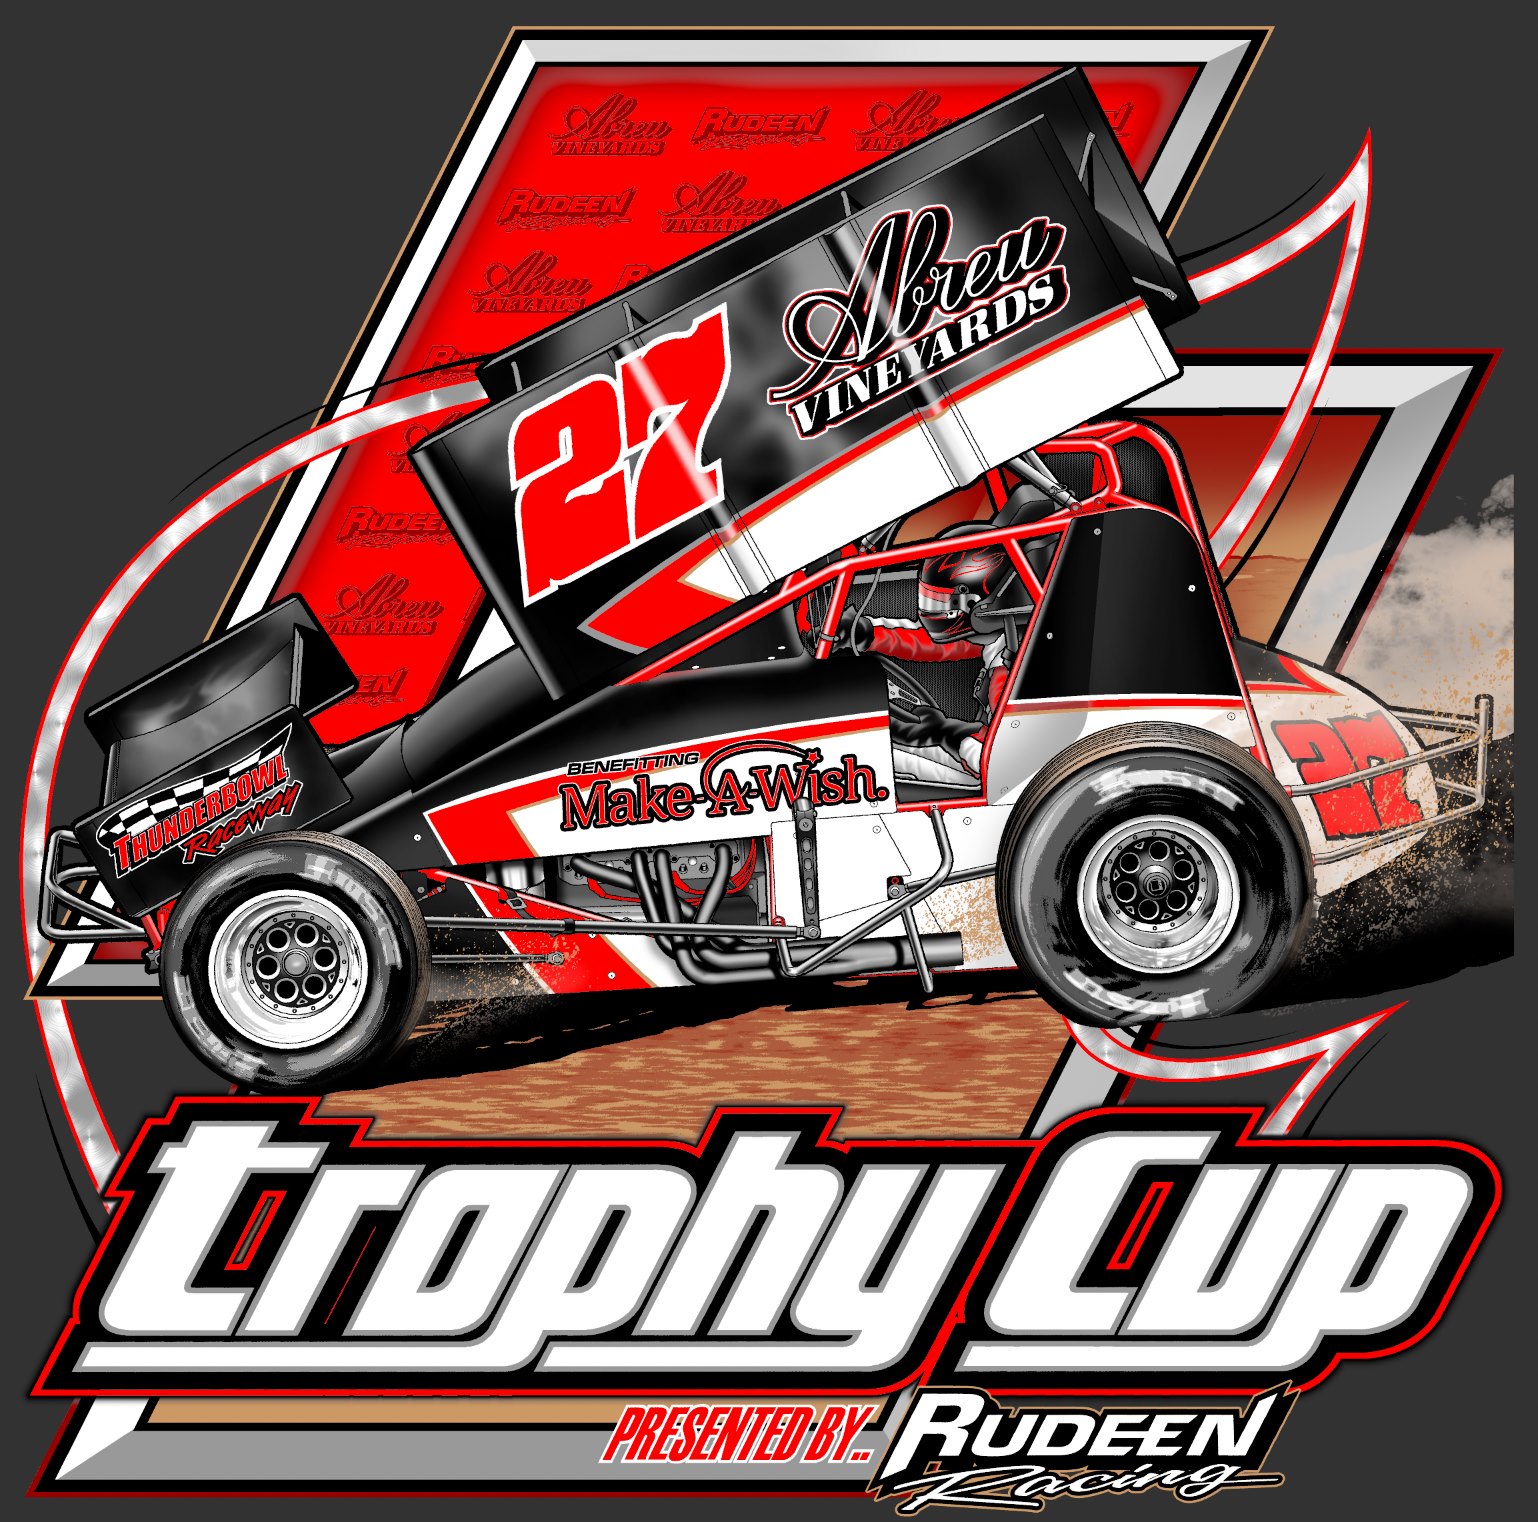 Trophy Cup 27 week has arrived at Thunderbowl Raceway in Tulare